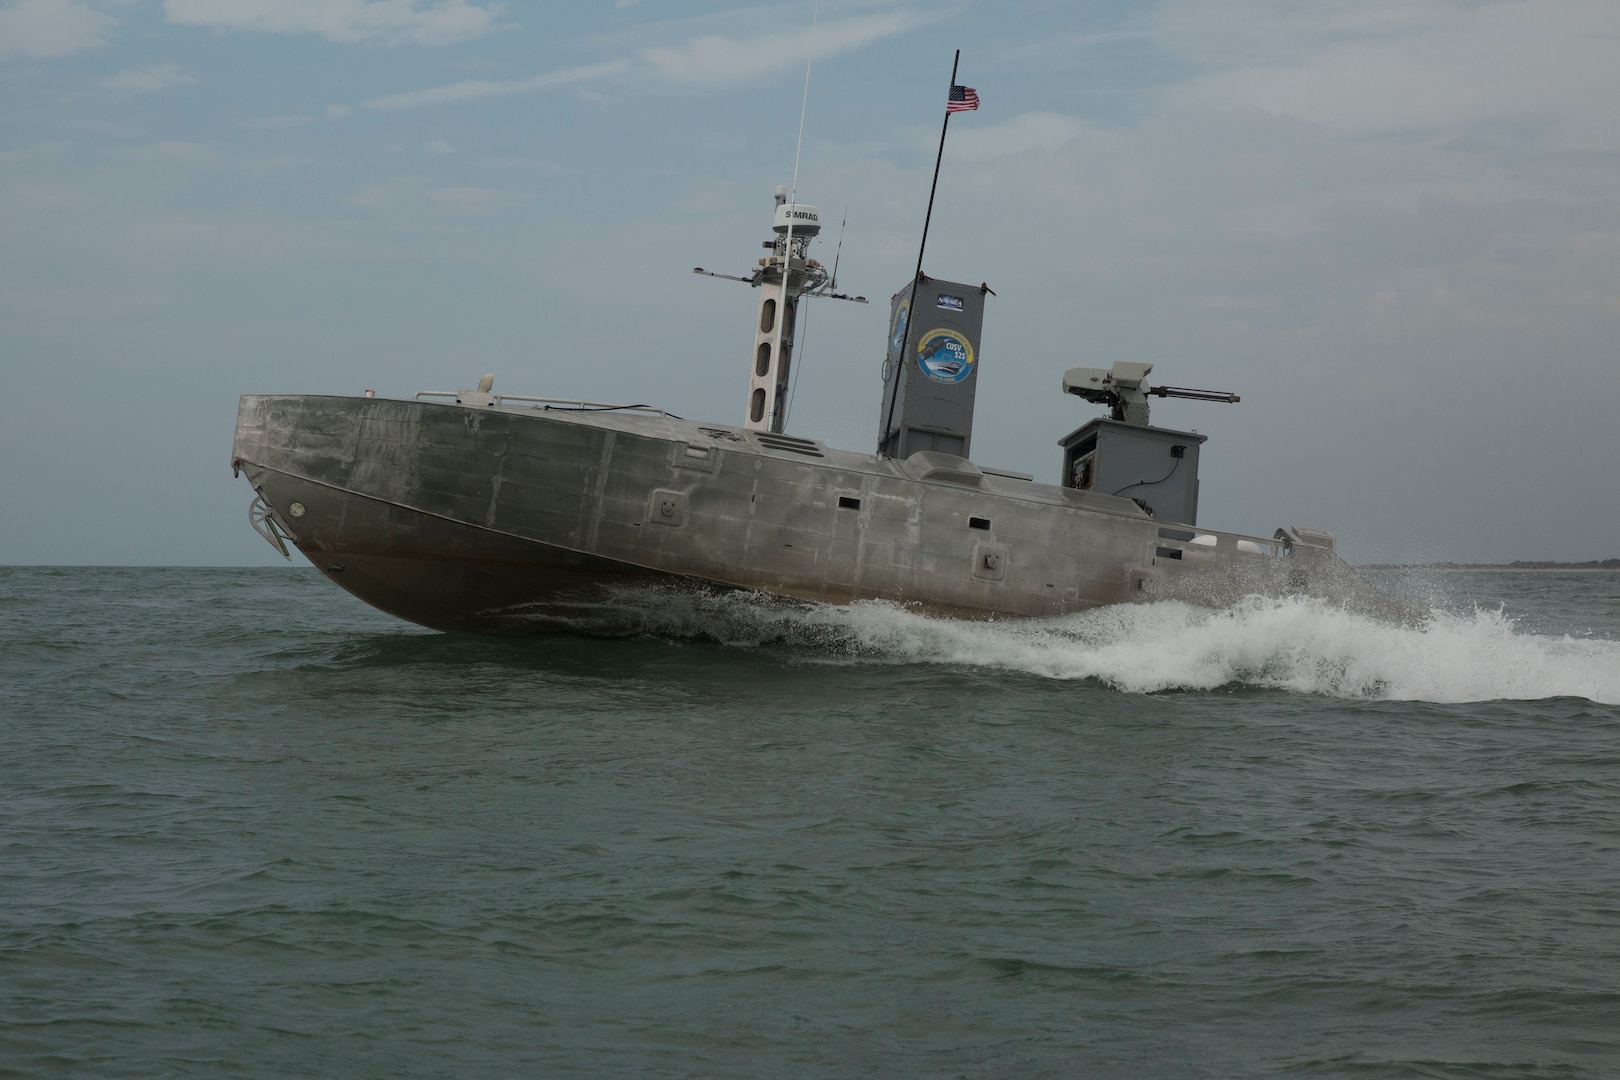 An Expeditionary Warfare Unmanned Surface Vessel autonomously navigates a predetermined course through the water during Advanced Naval Technology Exercise 2019 at Camp Lejeune, N.C. July 12, 2019. ANTX East 2019 is an event designed to test new technology with acedemic, industry and Navy participants. (Marine Corps photo by LCpl. Nicholas Guevara)